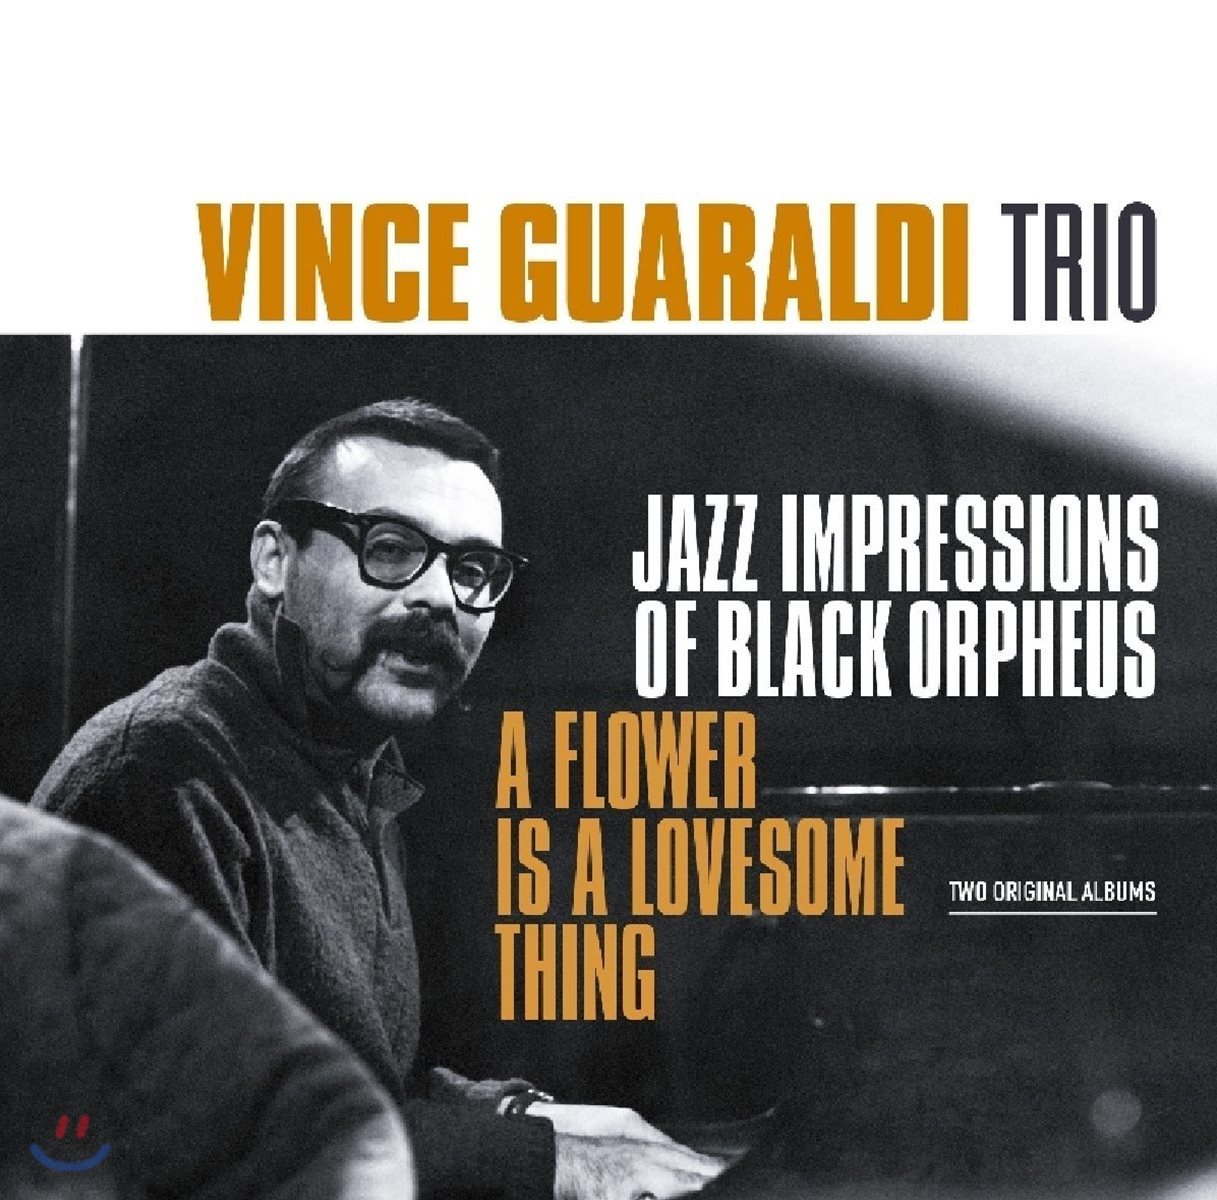 Vince Guaraldi Trio (빈스 과랄디 트리오) - Jazz impressions of Black Orpheus / A Flower is a Lovesome Thing